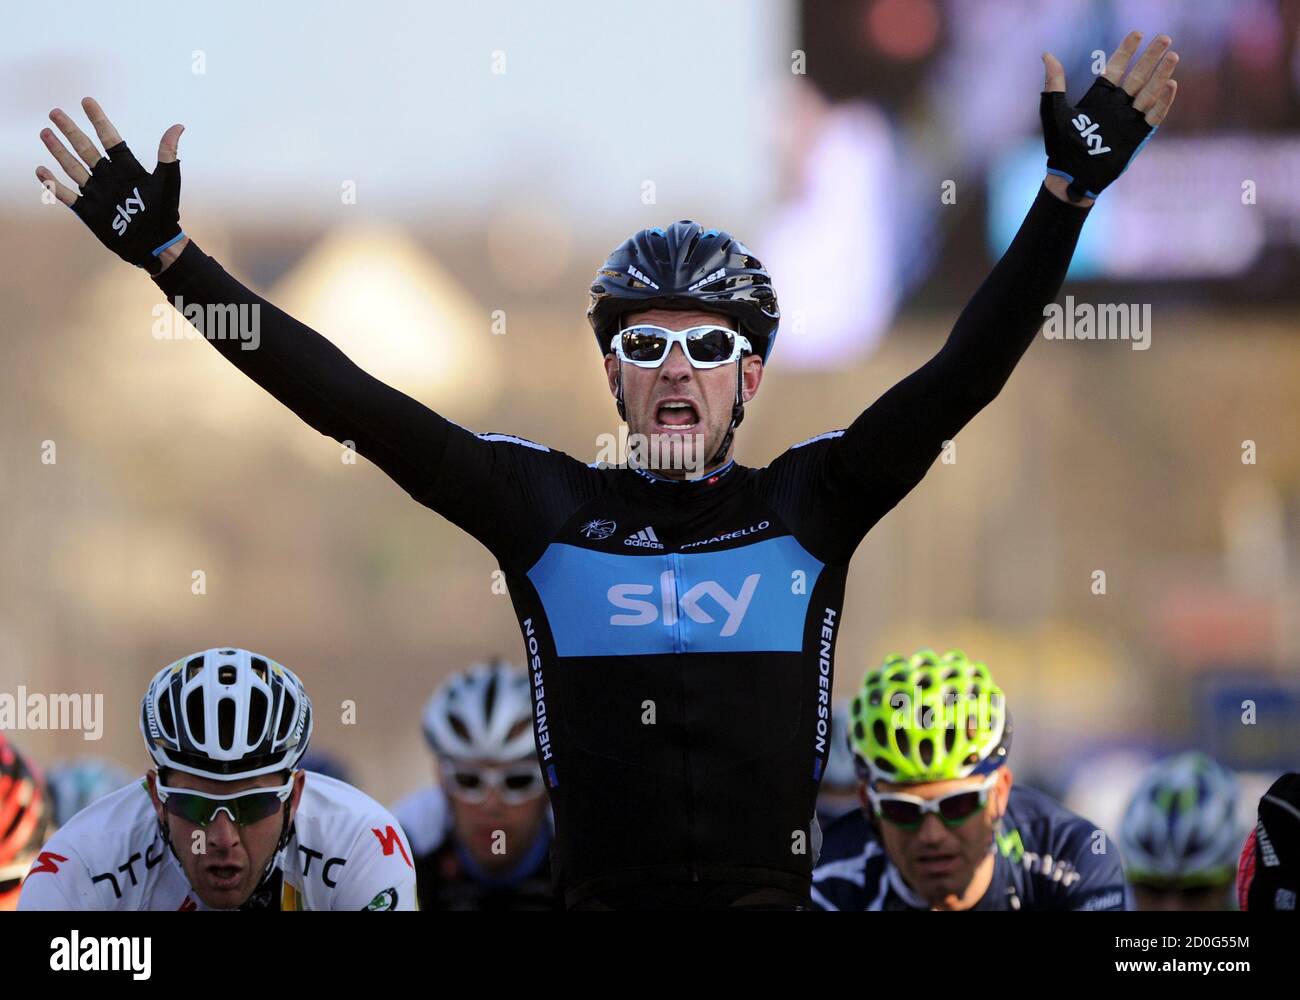 Sky team rider Gregory Henderson of New Zeland (C) celebrates winning the second of Paris Nice cycling race between and Amilly March 7, 2011. REUTERS/Eric Gaillard (FRANCE - Tags: SPORT